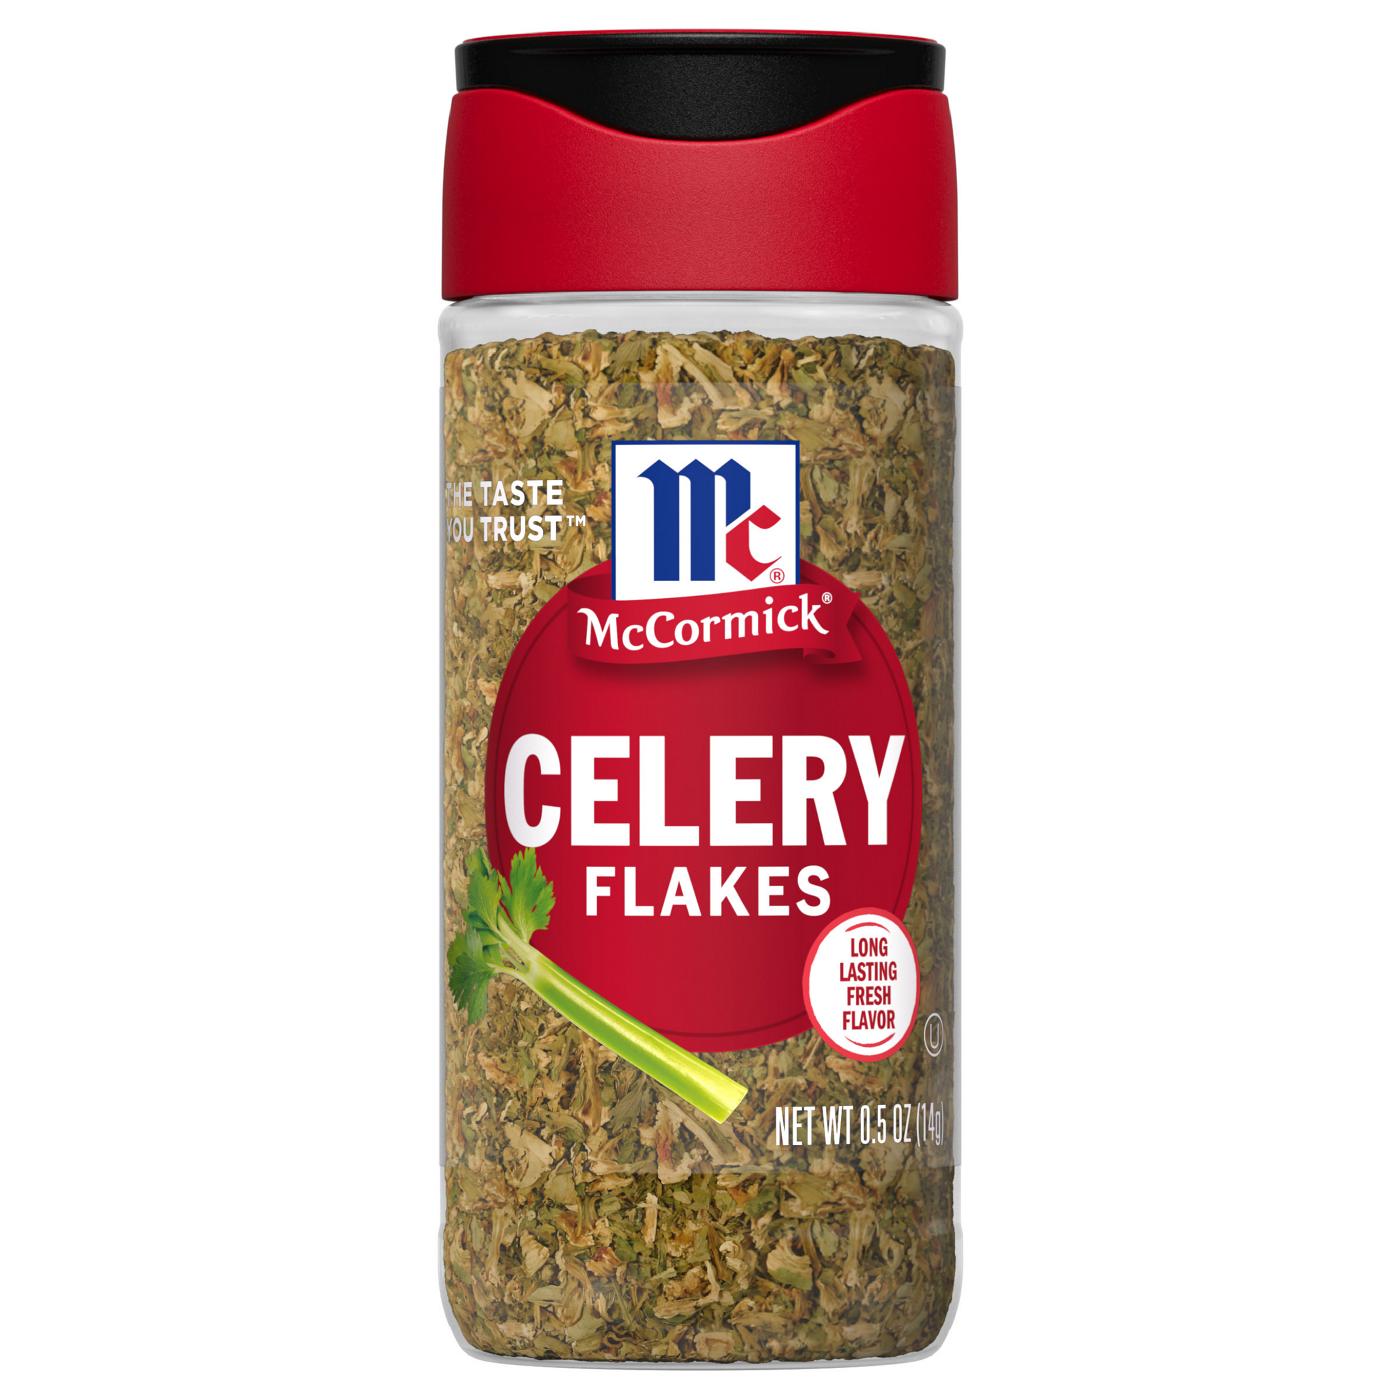 McCormick Celery Flakes; image 1 of 7